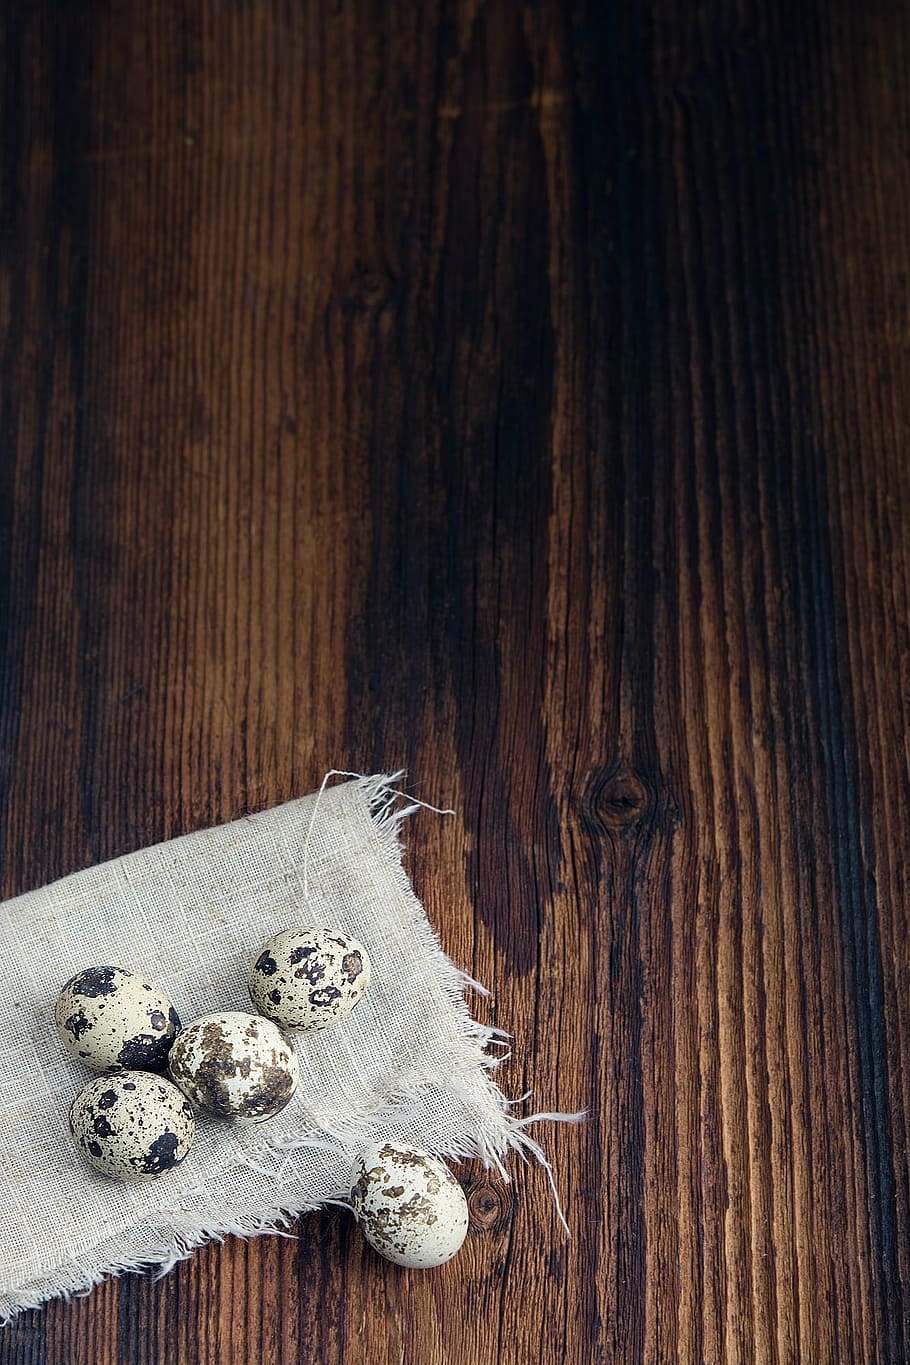 egg, quail eggs, small eggs, natural product, still life, wood, easter, close, text dom, negative space